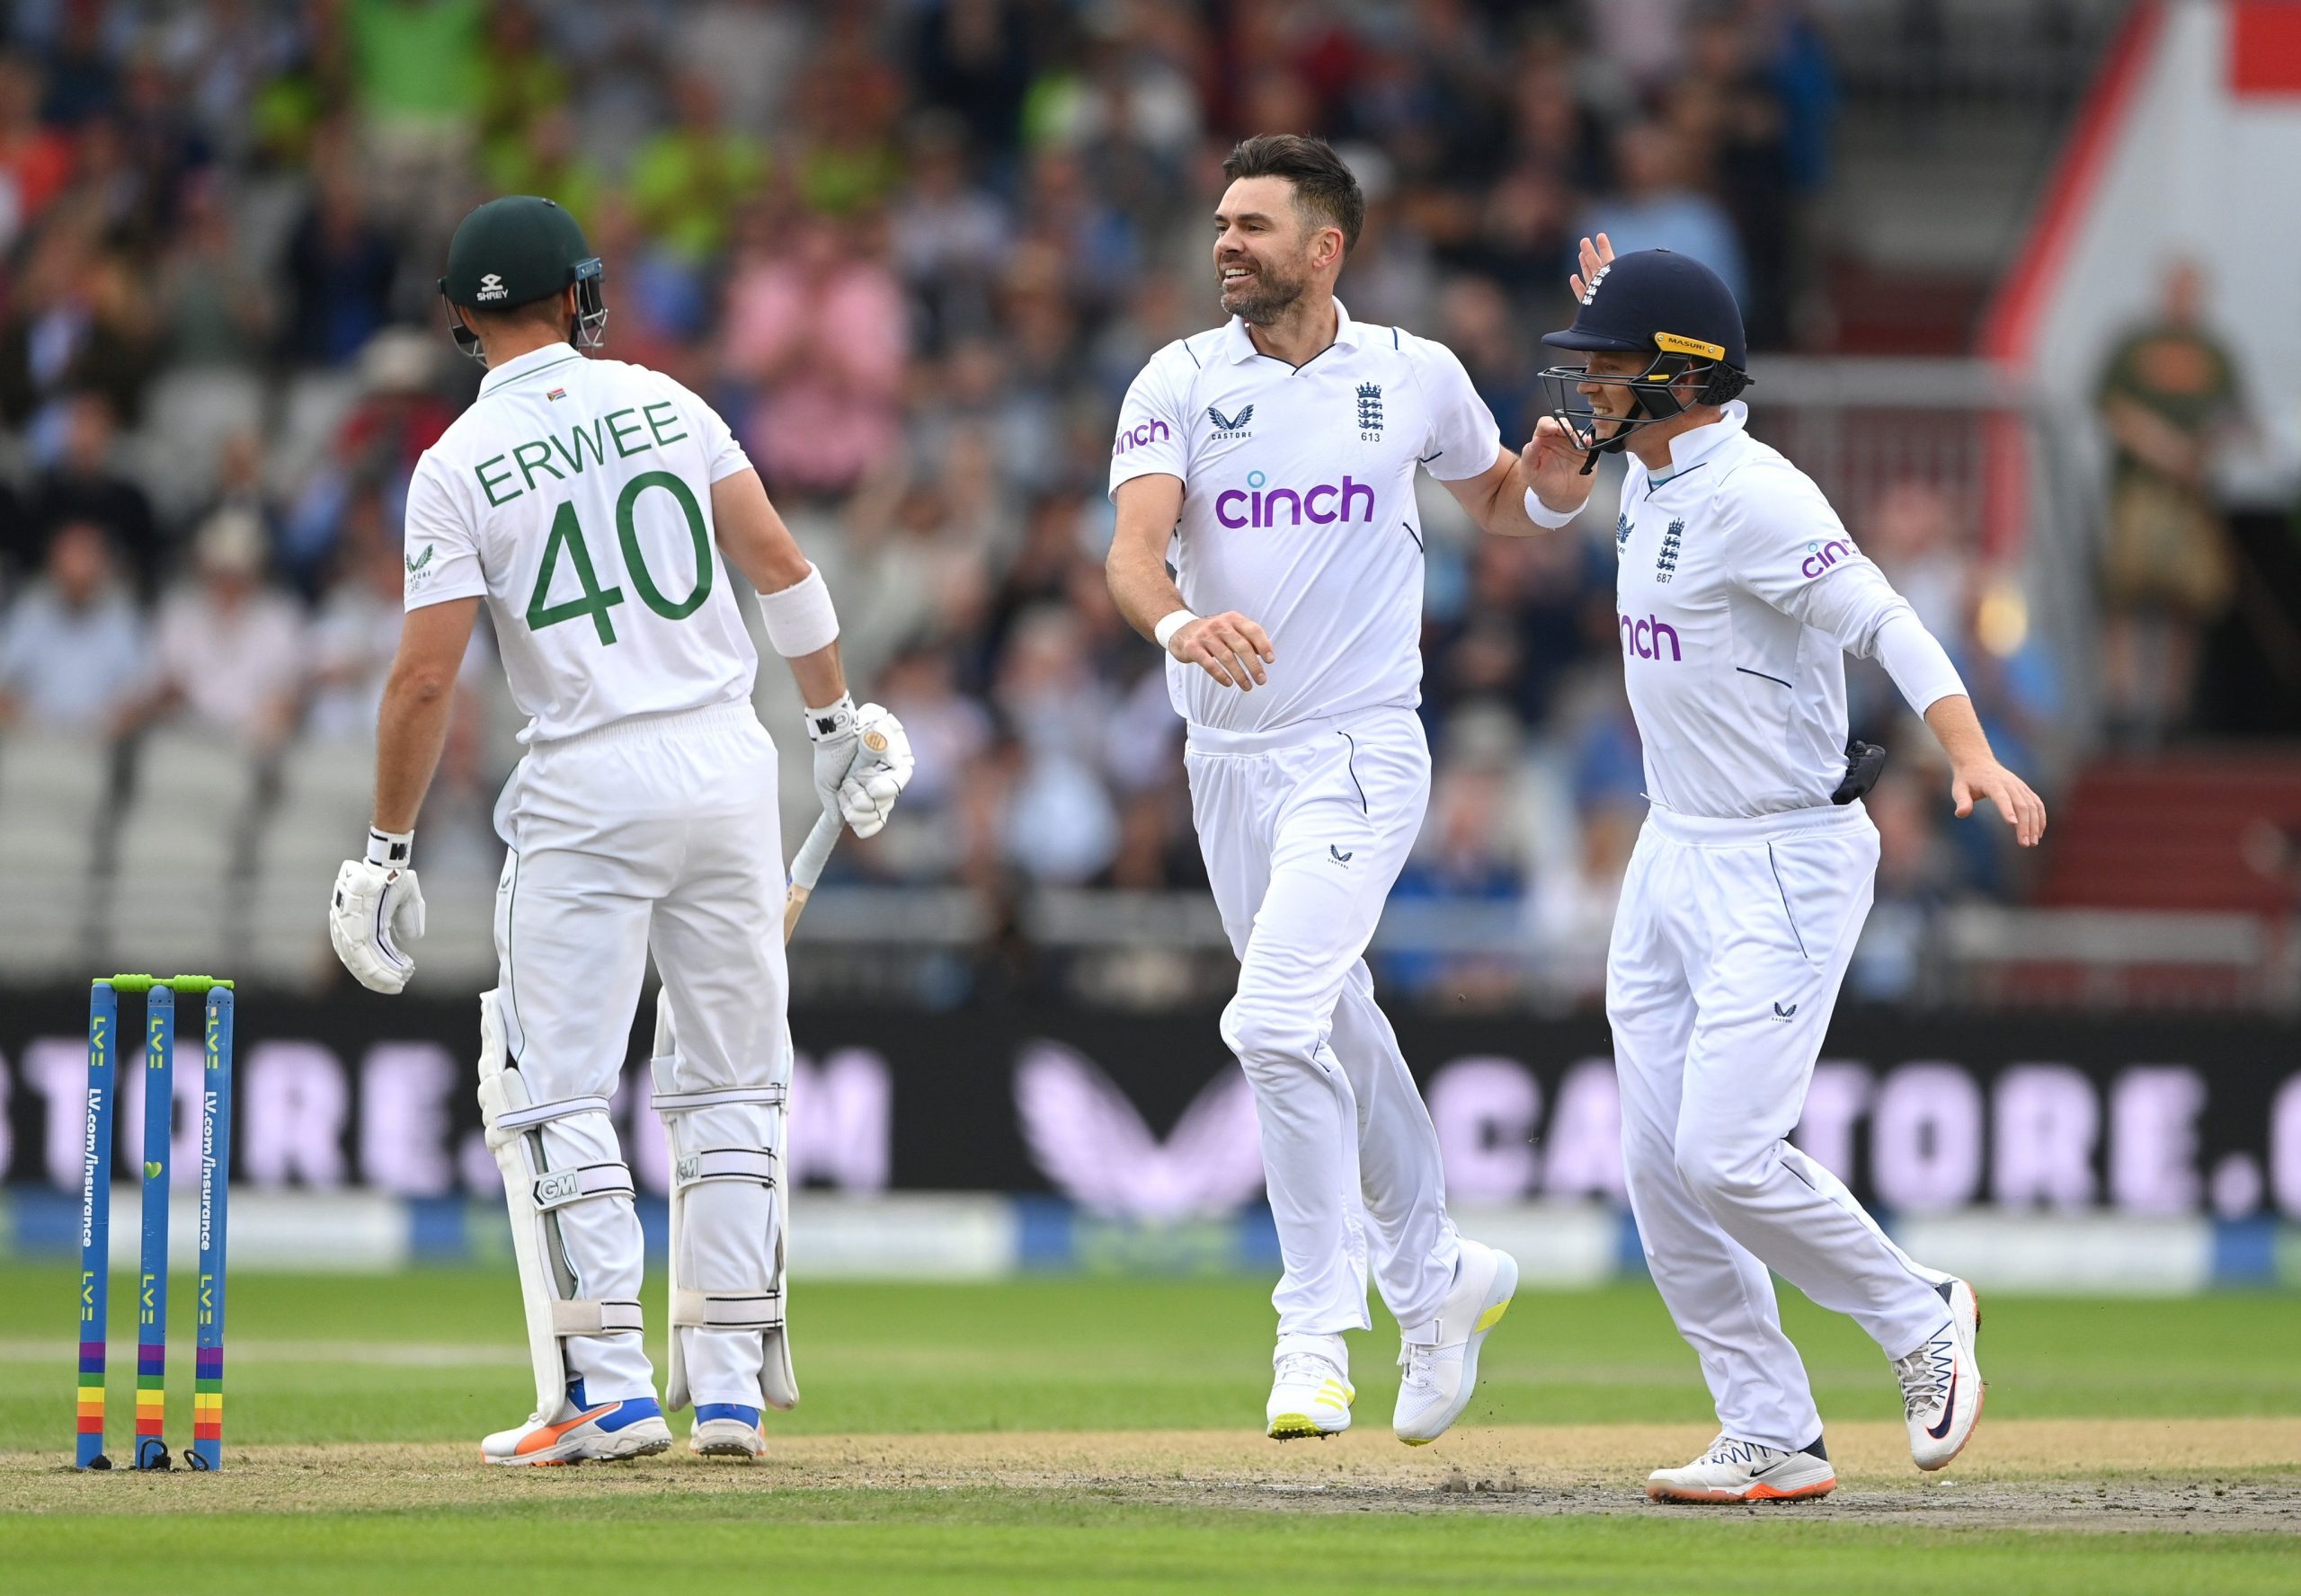 England vs South Africa: James Anderson becomes first player to play 100 Tests in a single country